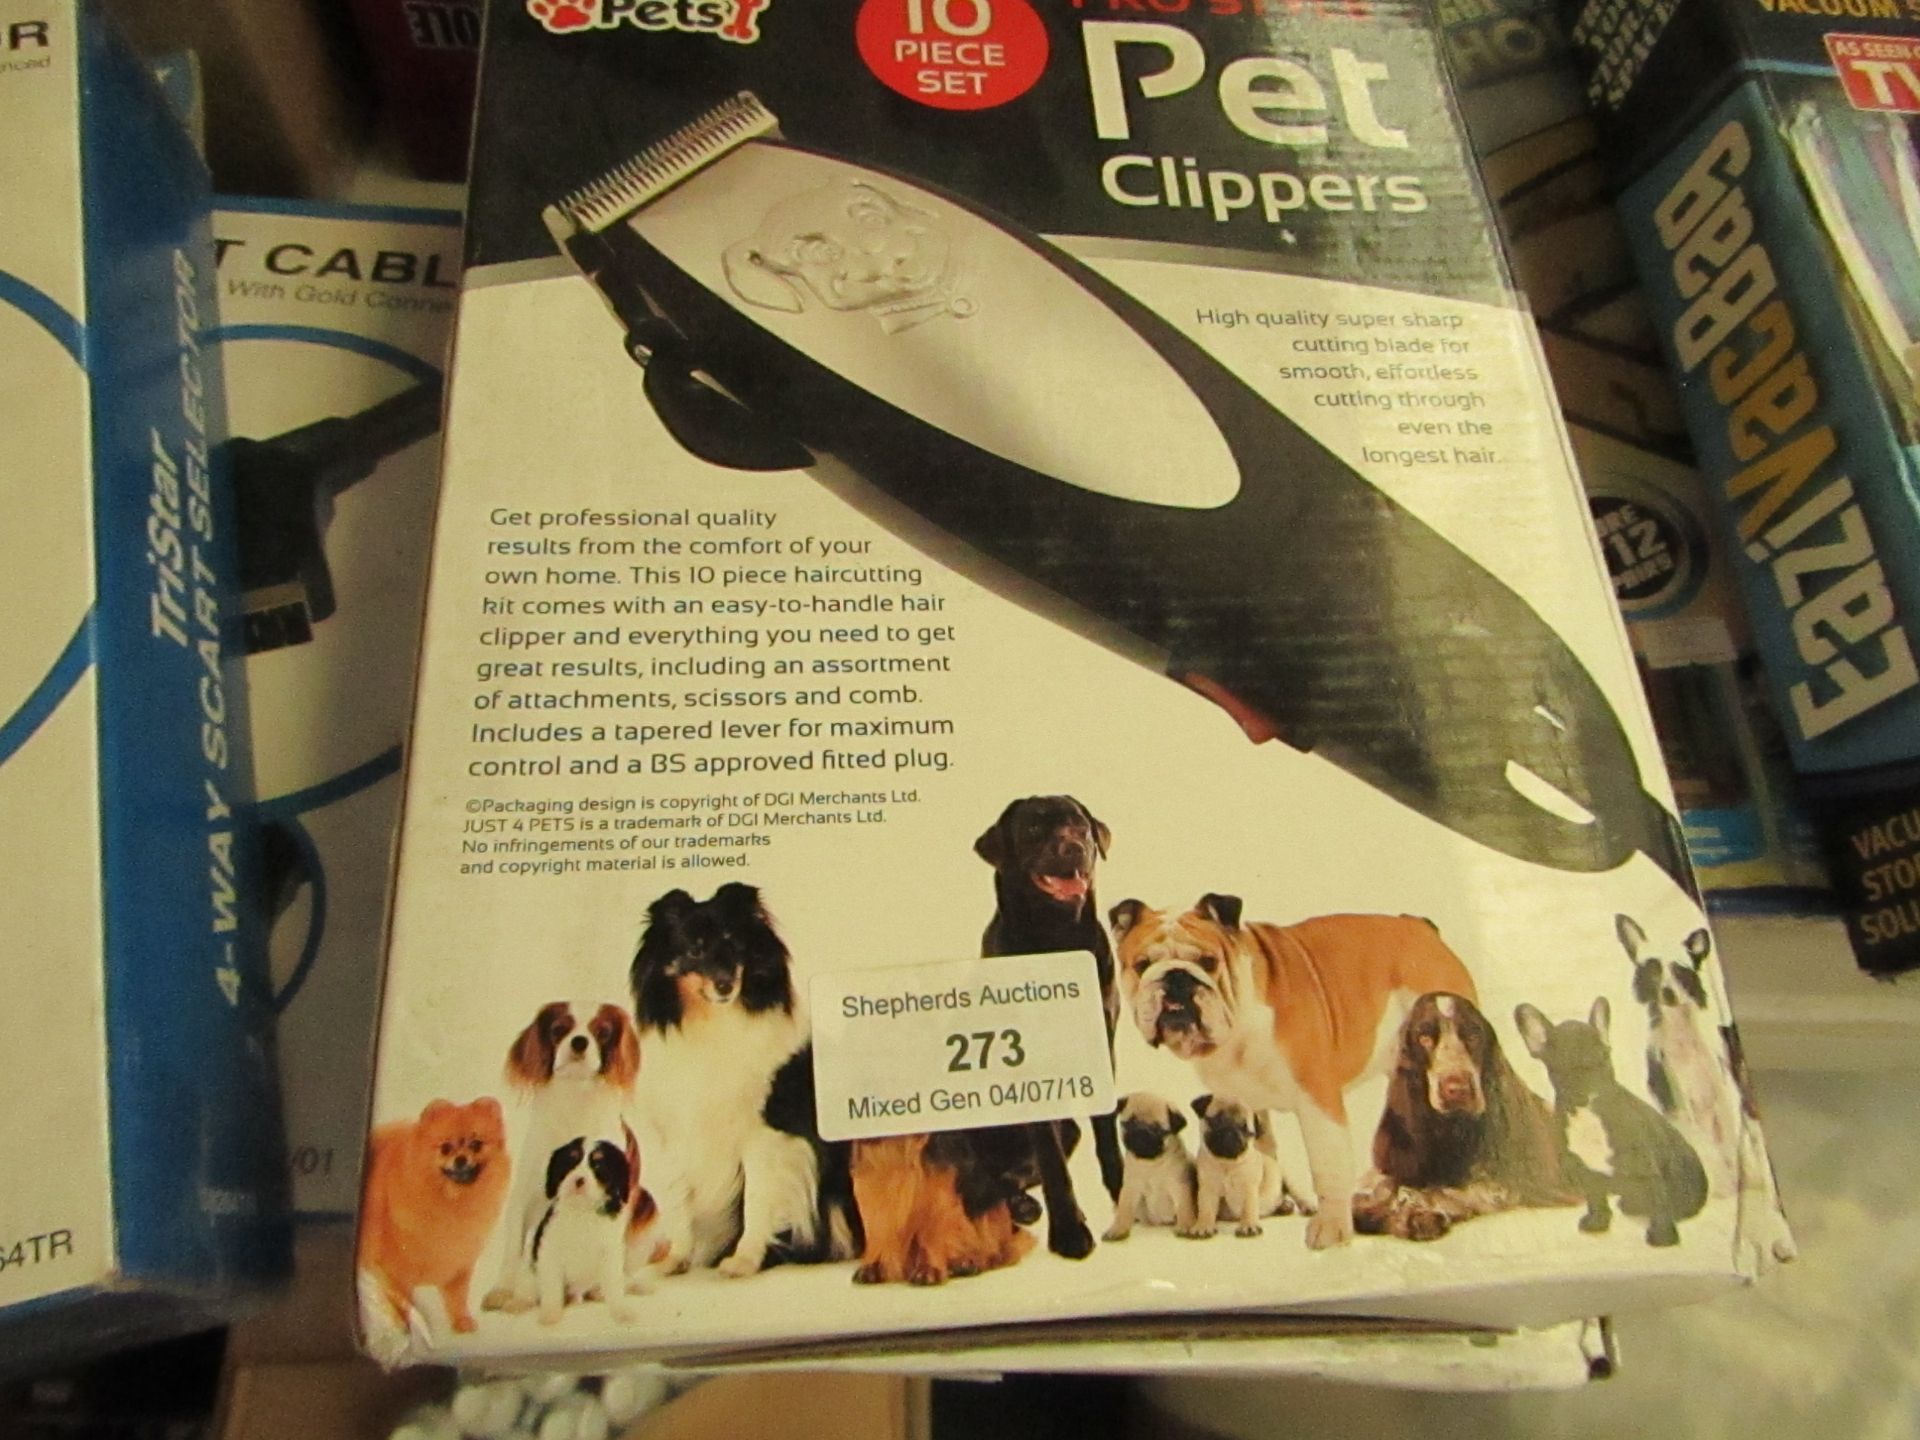 Just 4 pets pro style pet clippers, unchecked and boxed.